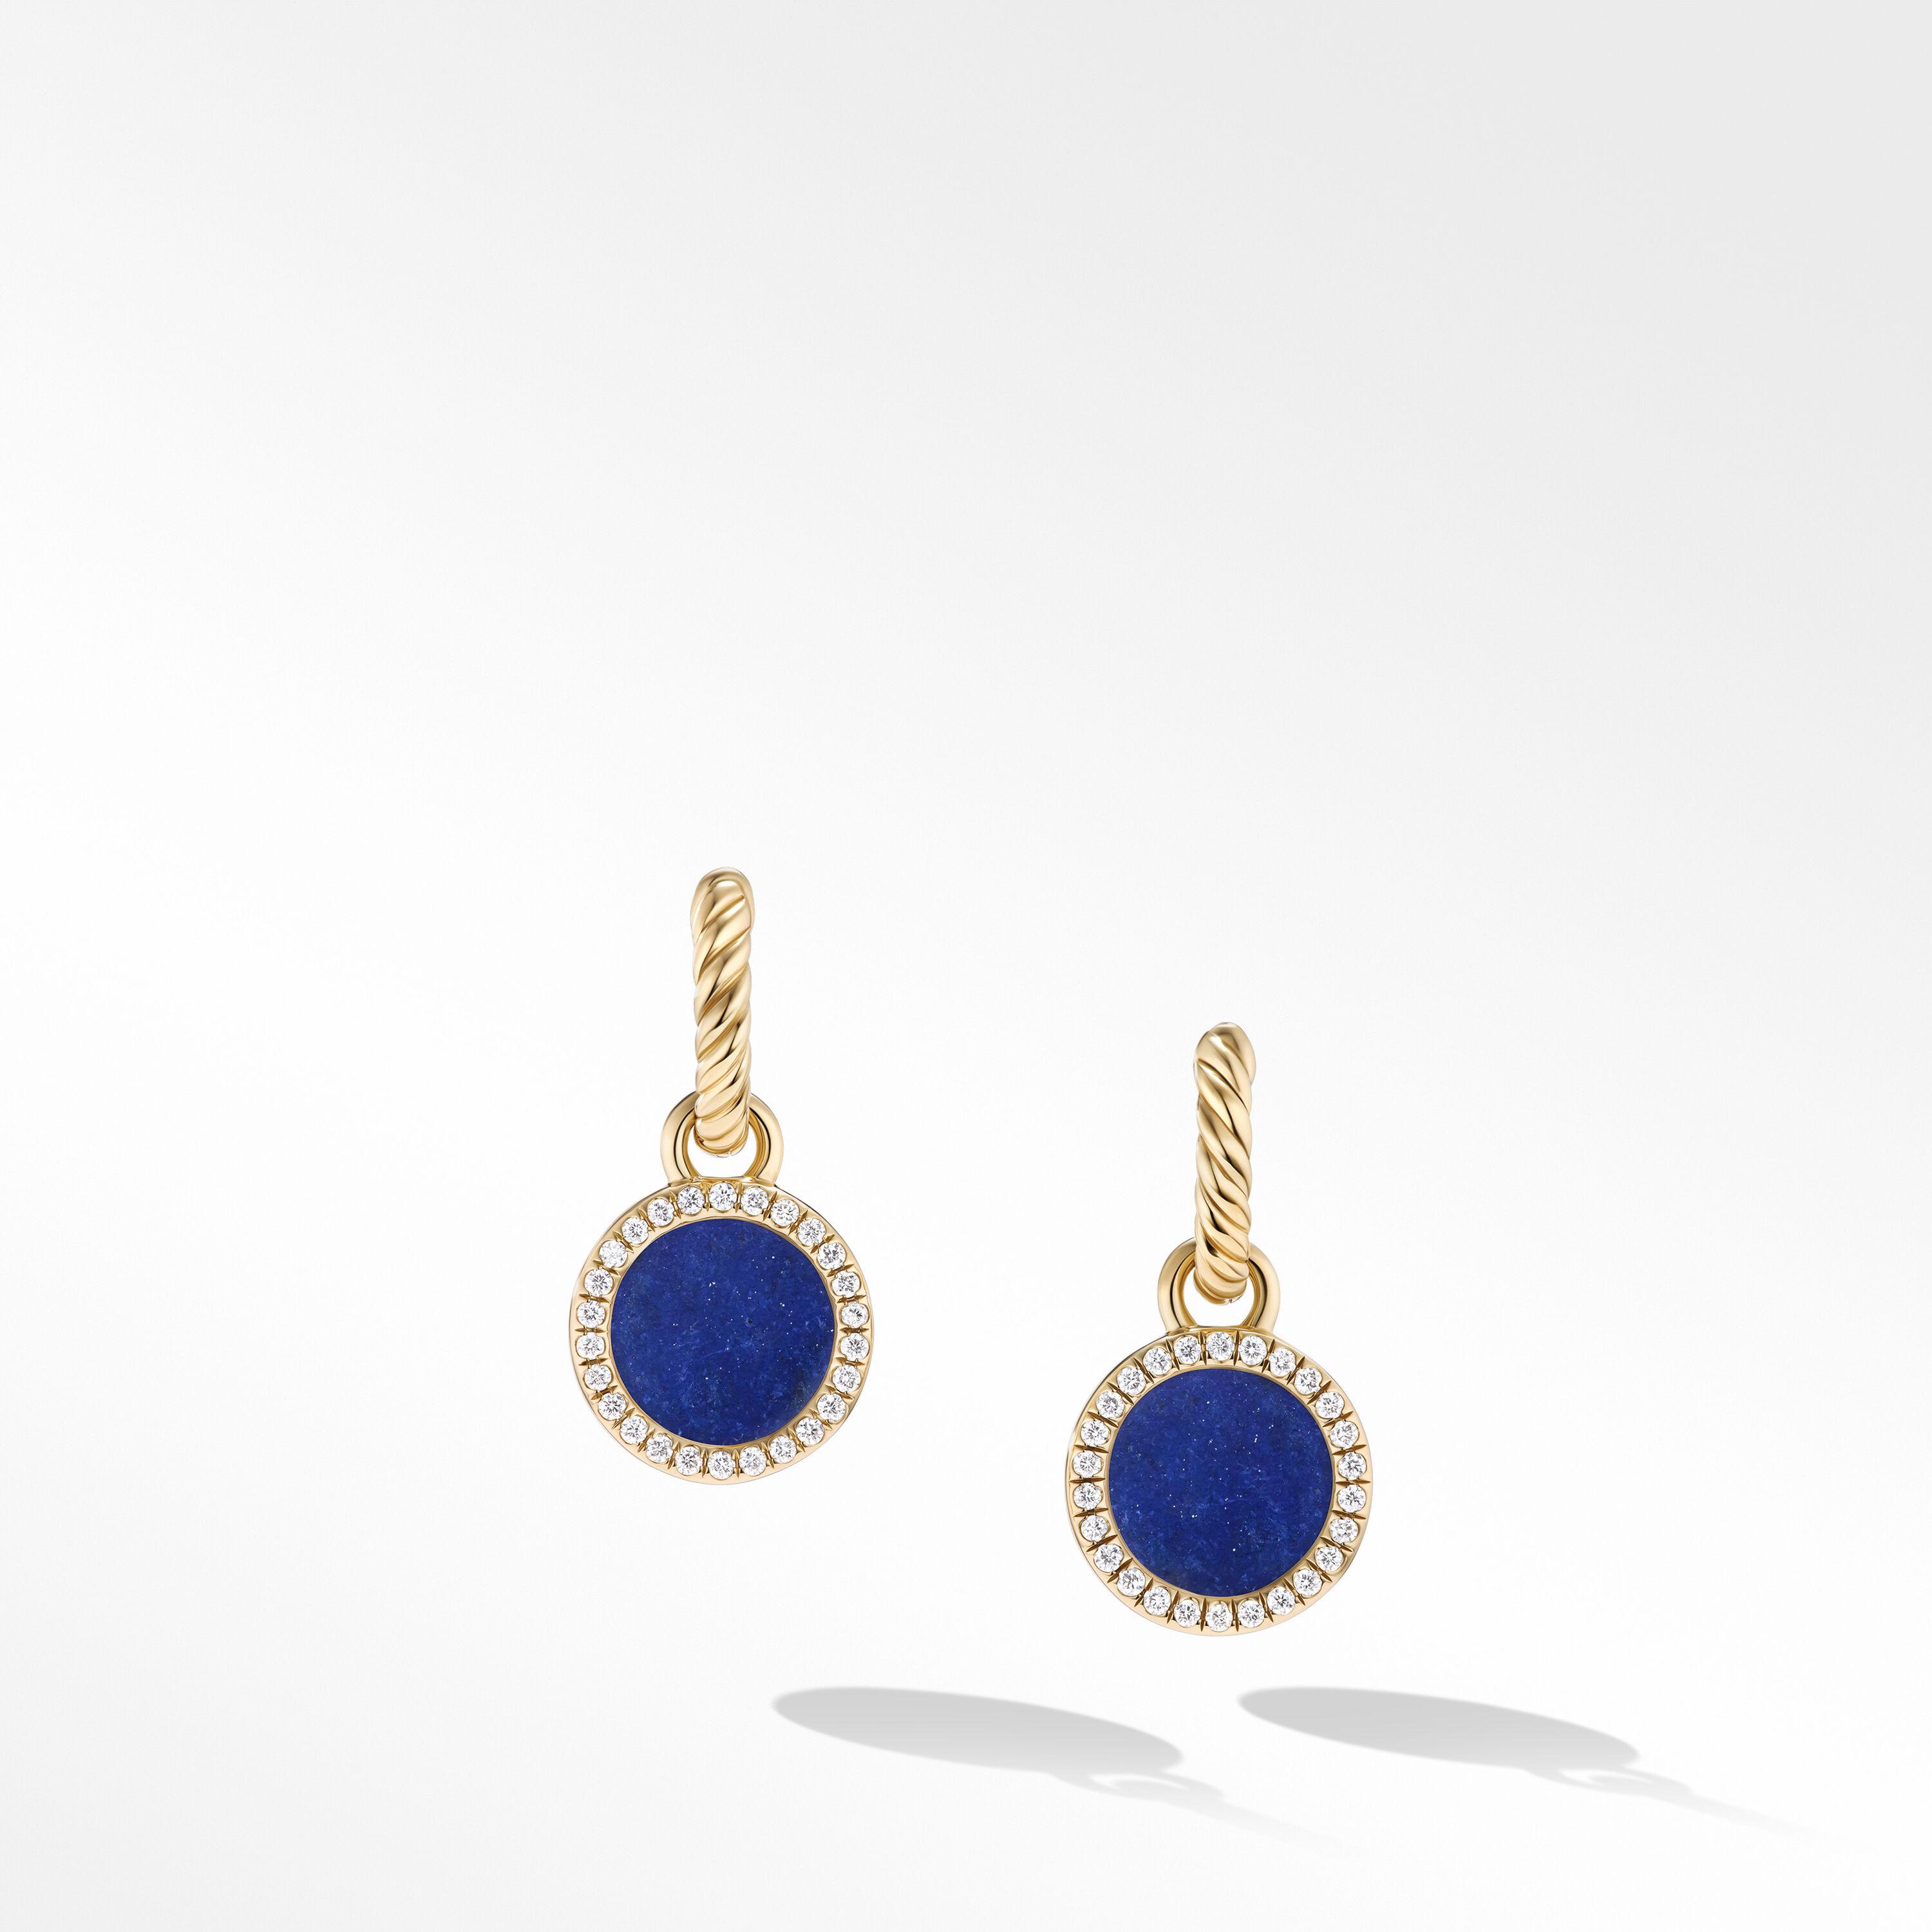 David Yurman Petite DY Elements Drop Earrings with Lapis and Pave Diamonds